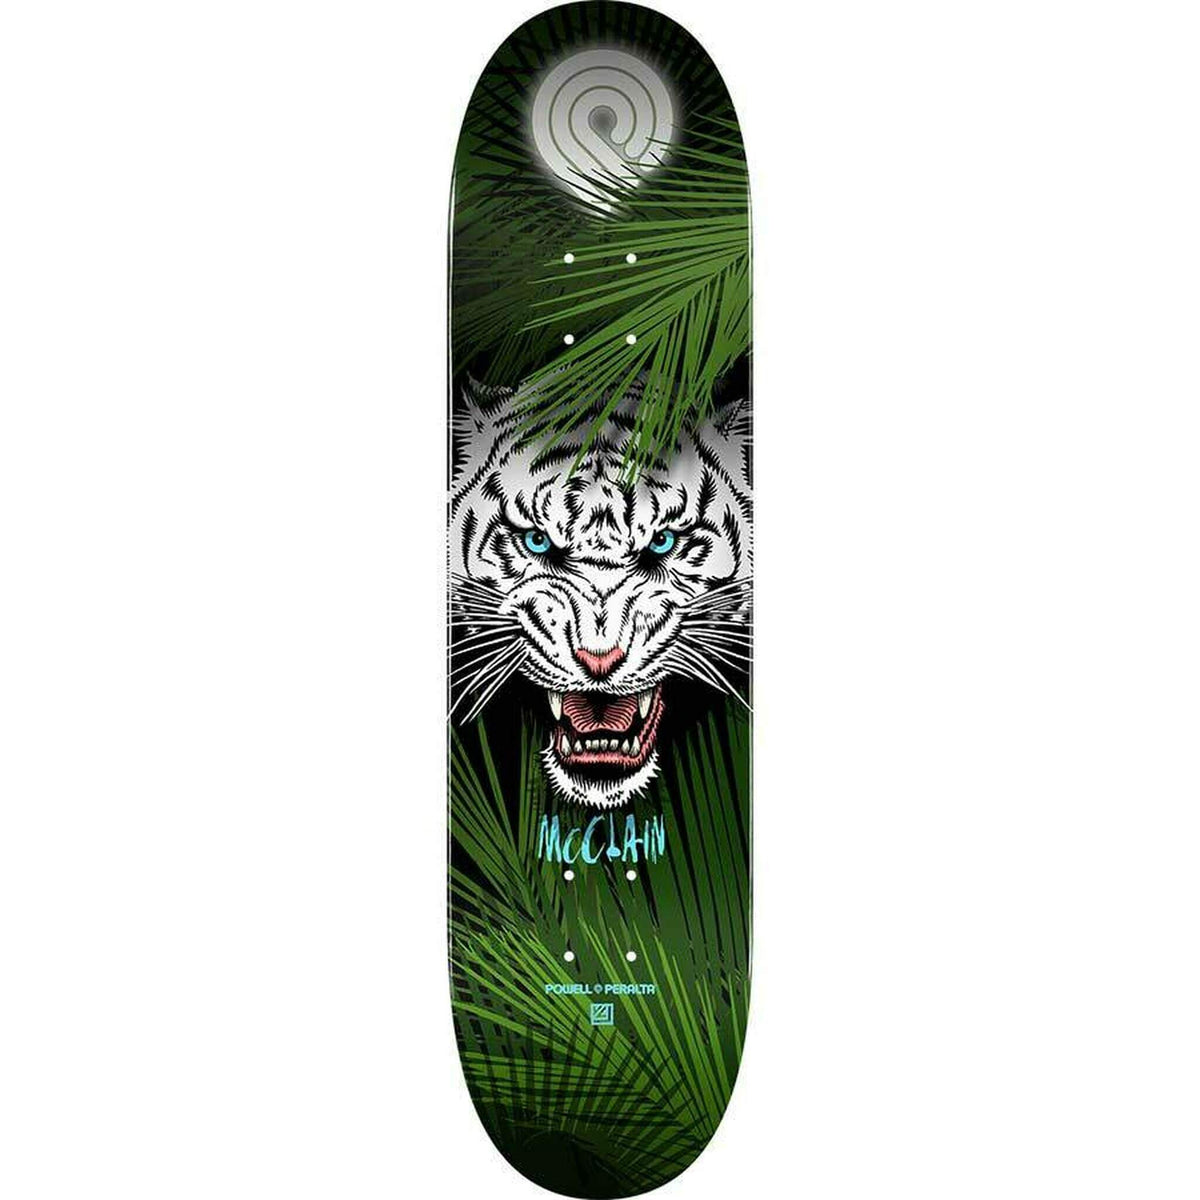 Powell-Peralta McClain Tiger 2, 243, 8.25", Deck Only